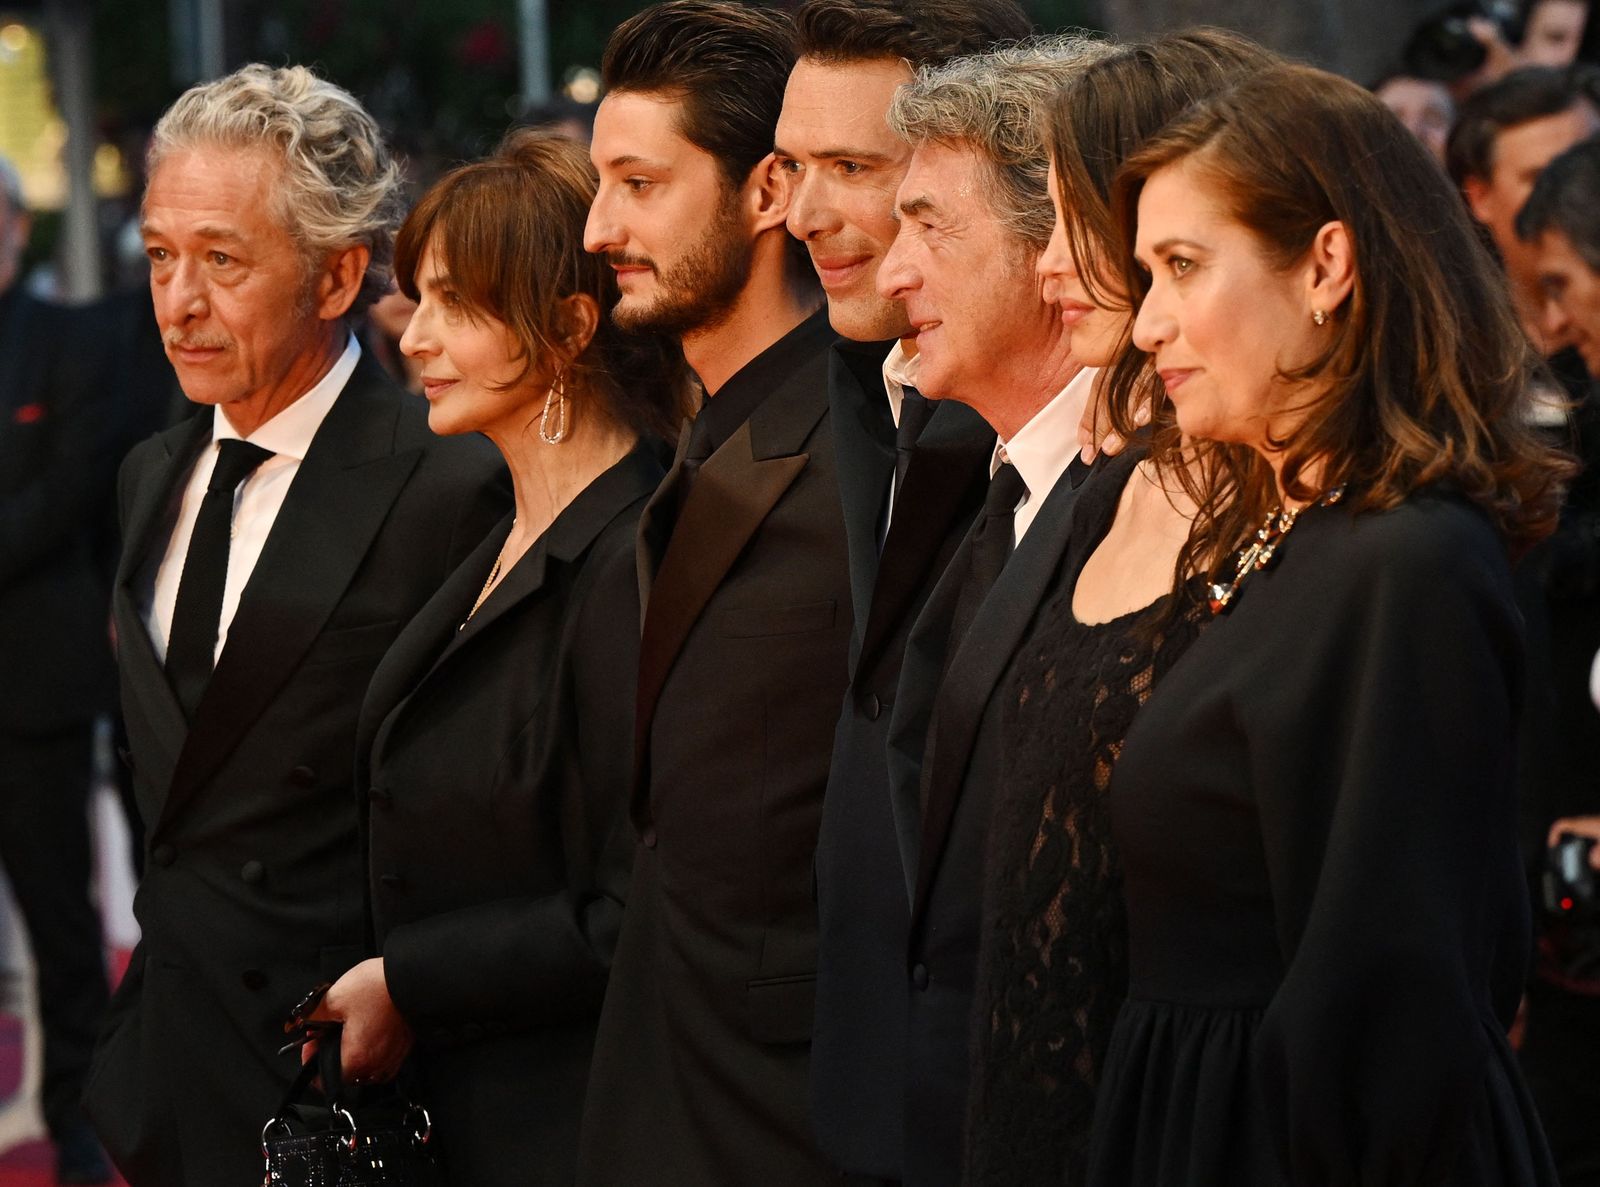 (From L) French actor Nicolas Briancon, Italian actress Laura Morante, French actor Pierre Niney, French director Nicolas Bedos, French actor Francois Cluzet, French actress Marine Vacth and French actress Emmanuelle Devos arrive for the screening of the film 